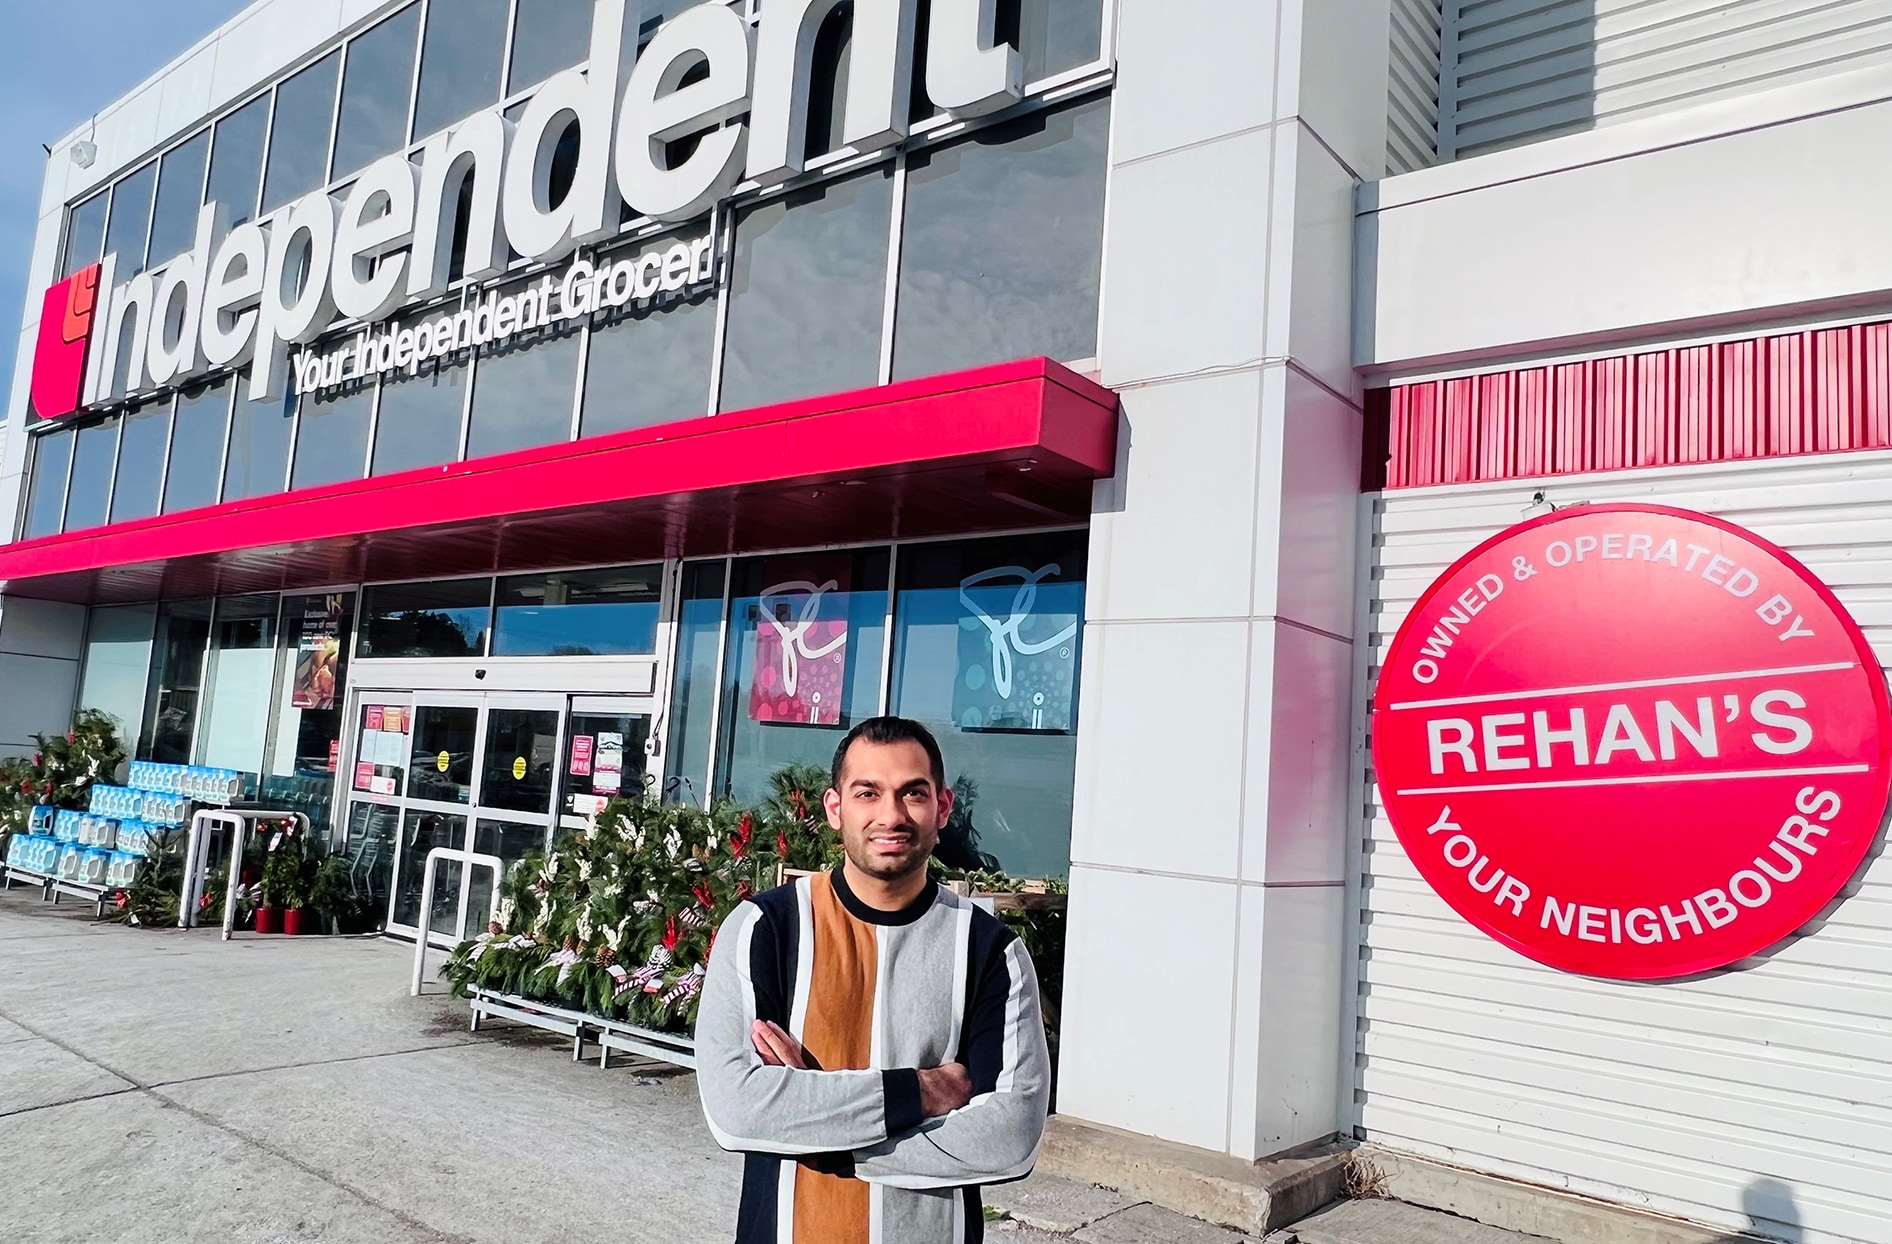 Rehan stands outside with his store and the Your Independent Grocer sign in the background.